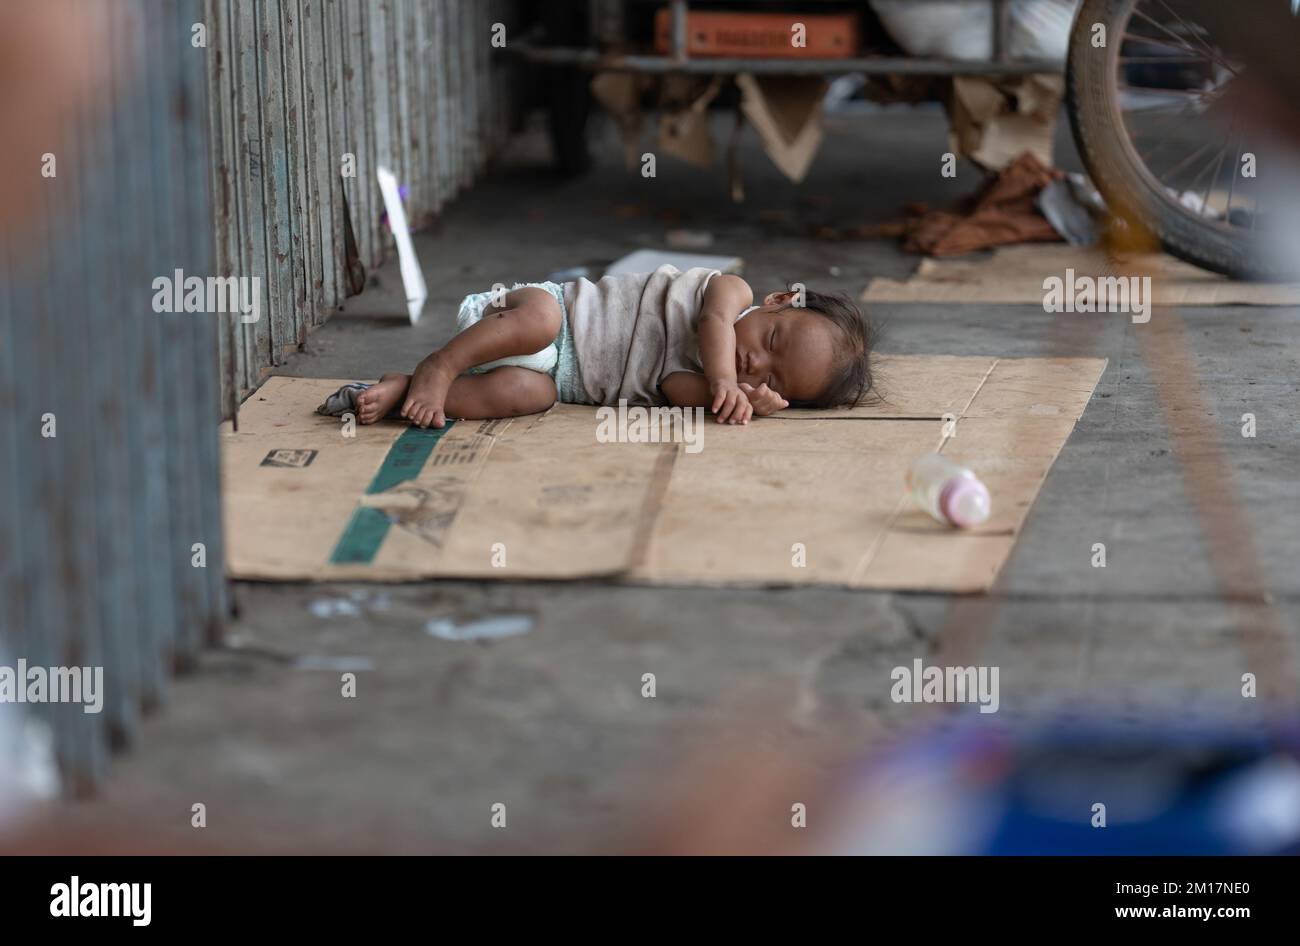 A small infant homeless street child, sleeping on a makeshift bed made of cardboard,Cebu City, Philippines Stock Photo